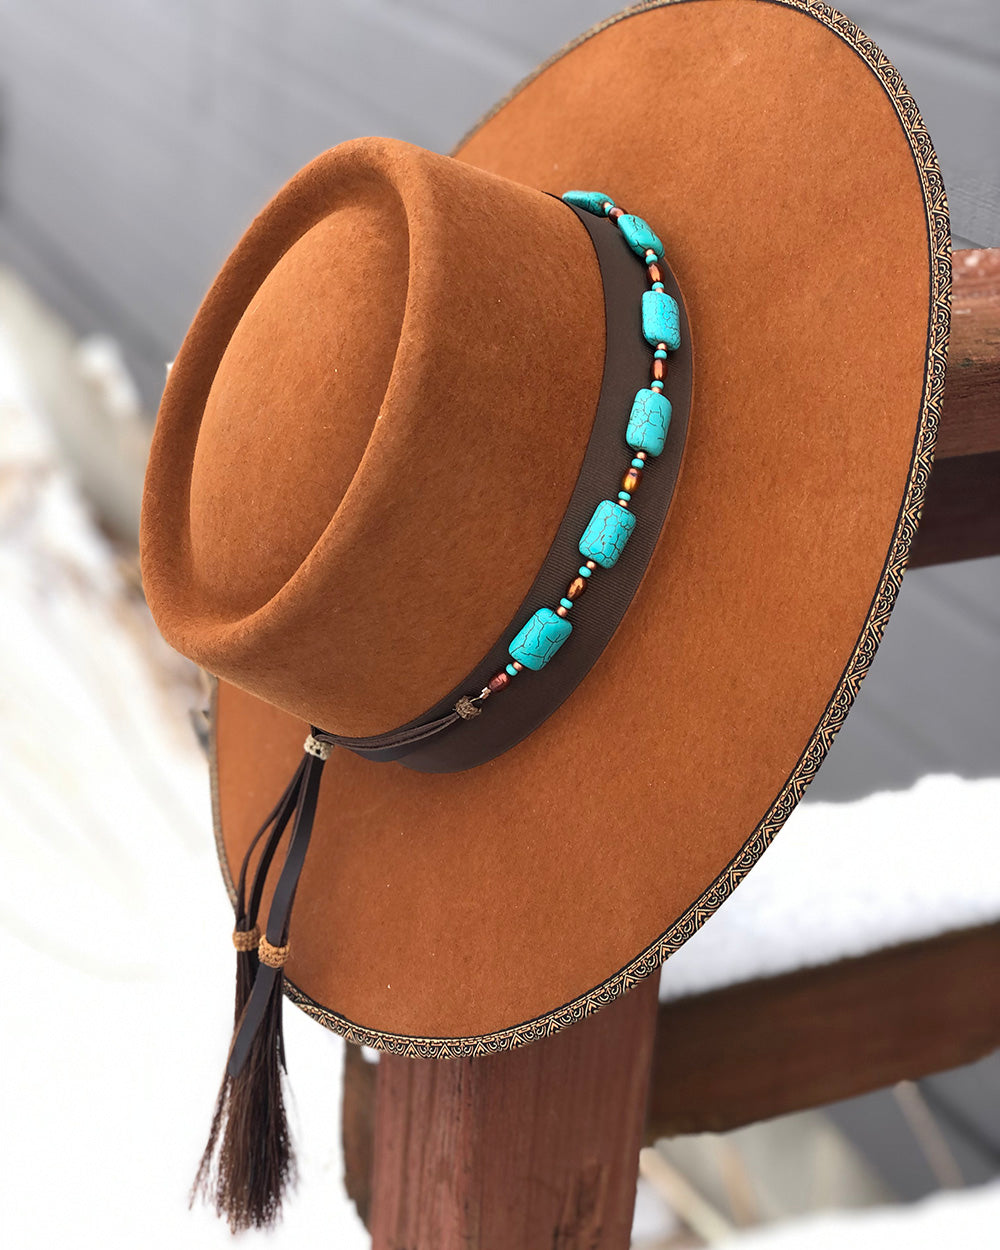 Hatband Display Package*Rodeo